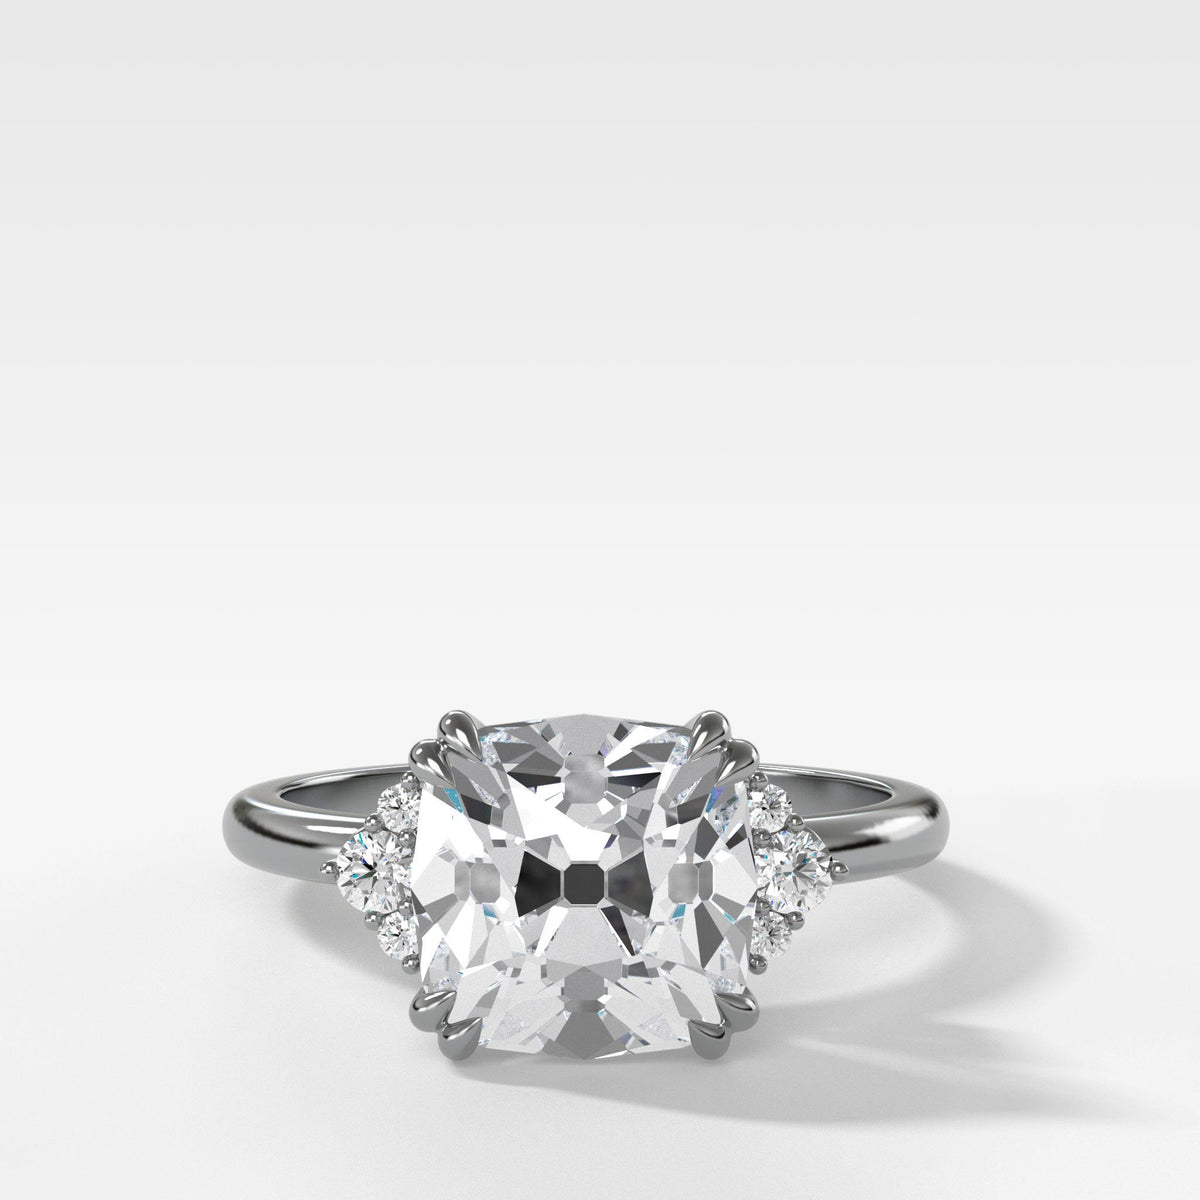 Signature Cluster Engagement Ring With Old Mine Cut by Good Stone in White Gold